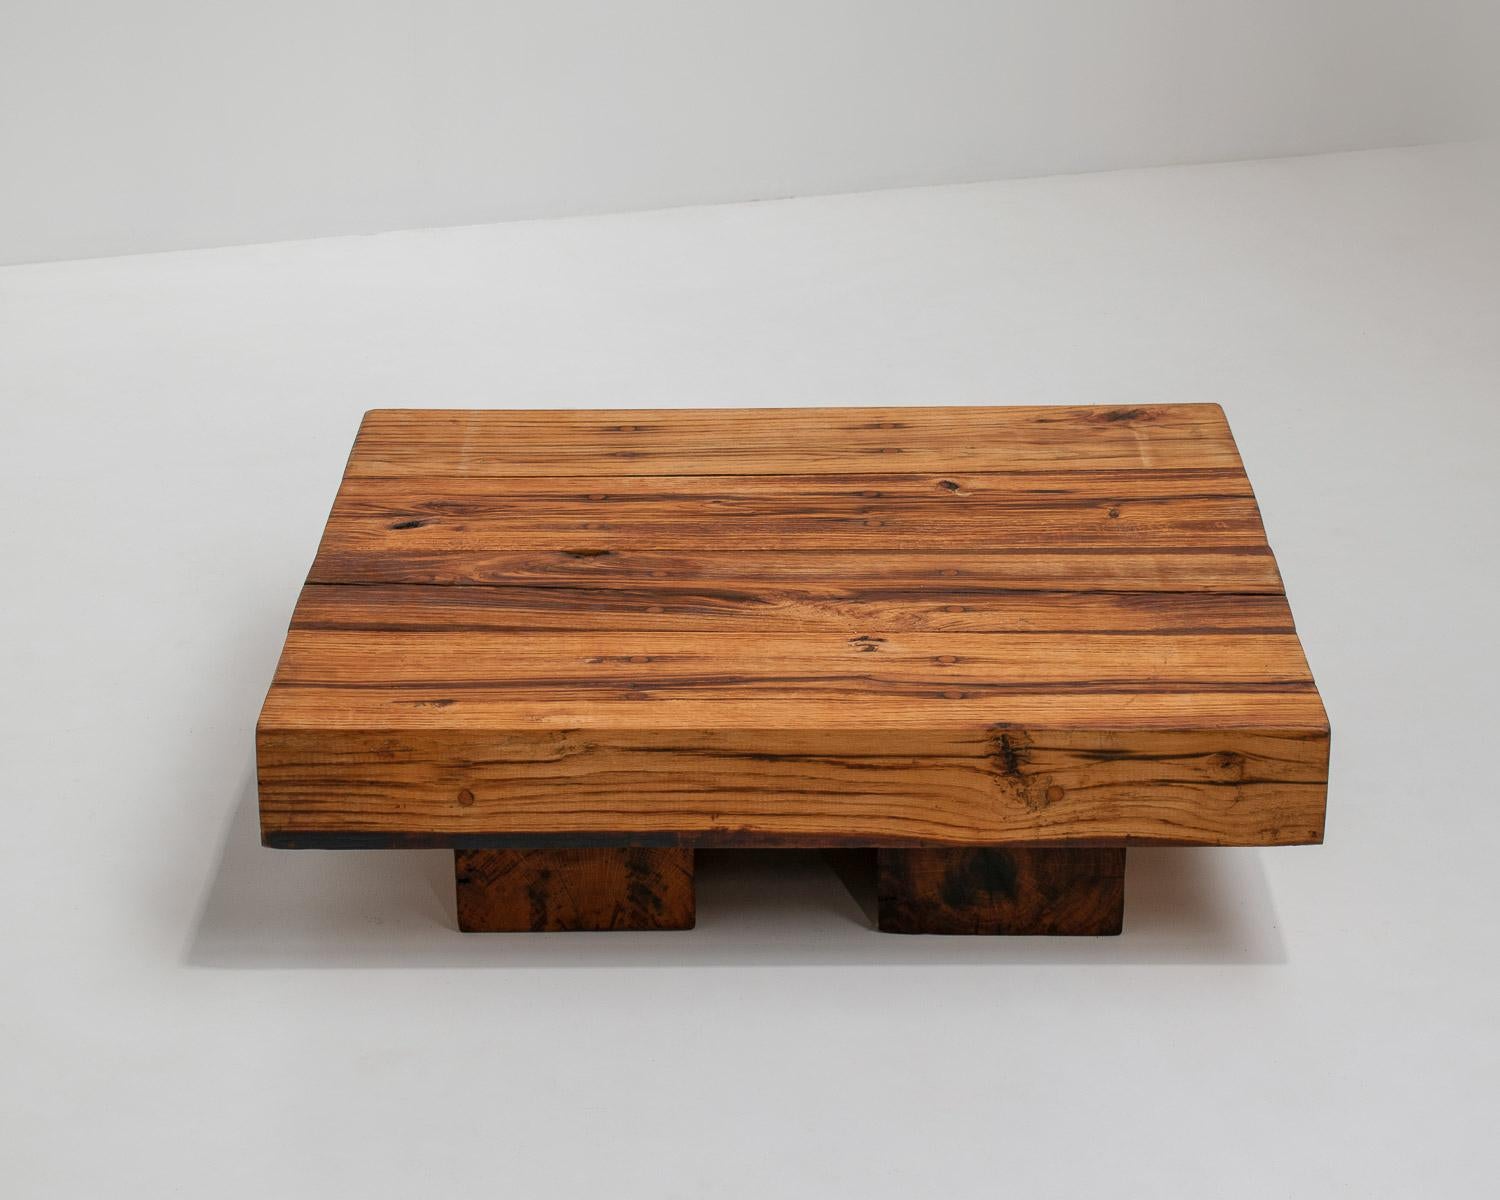 Solid Oak Wabi Sabi coffee table, France 1950s

The perfect rustic yet modern table that fits any wabi-sabi, natural, artisan, brutalist, or rustic-style interior. Because of its size, it perfectly fits in any interior that needs a more hefty